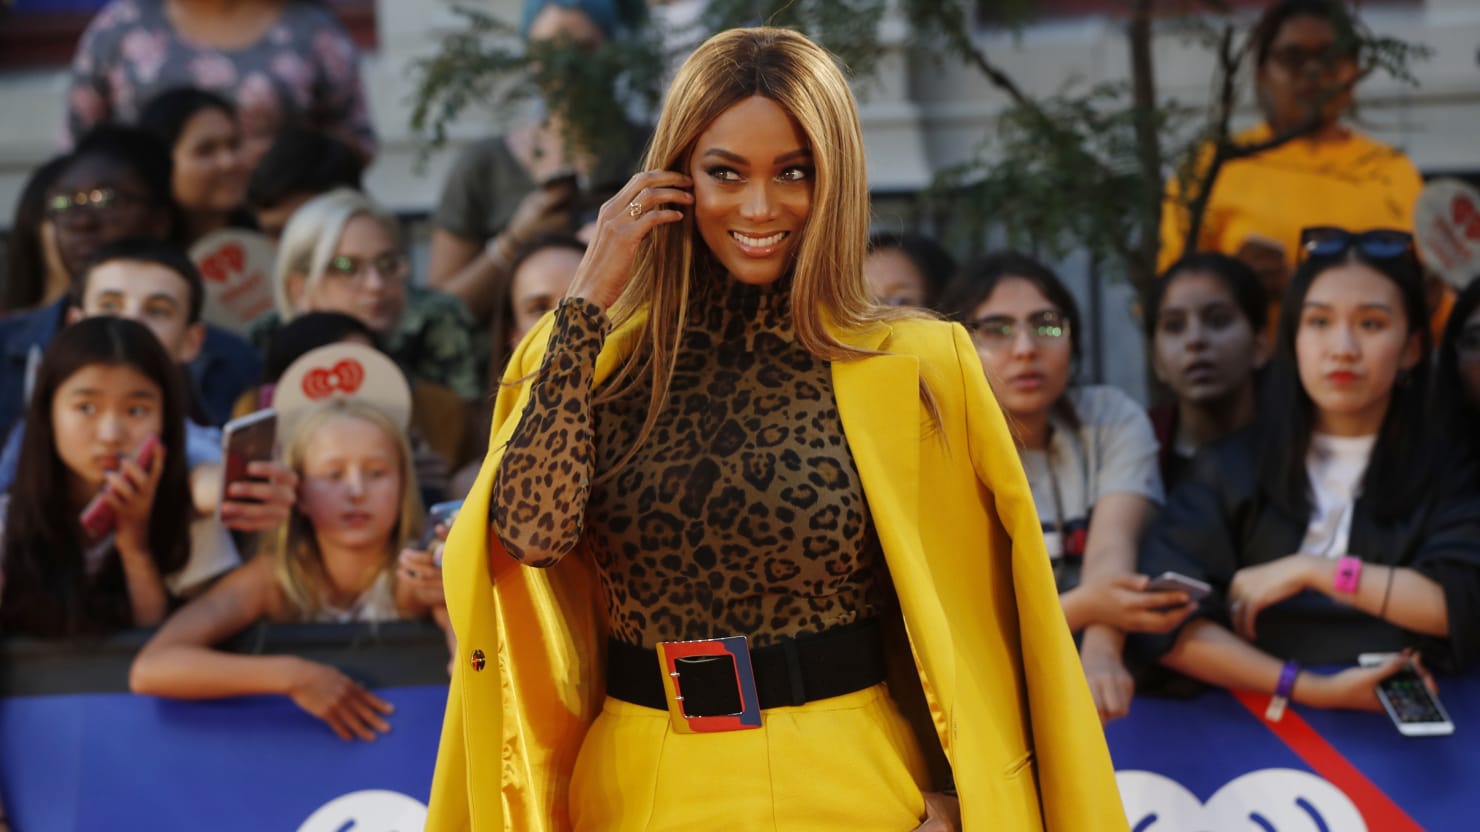 Tyra Banks On Sports Illustrated Swimsuit Issue Cover Years After Debut